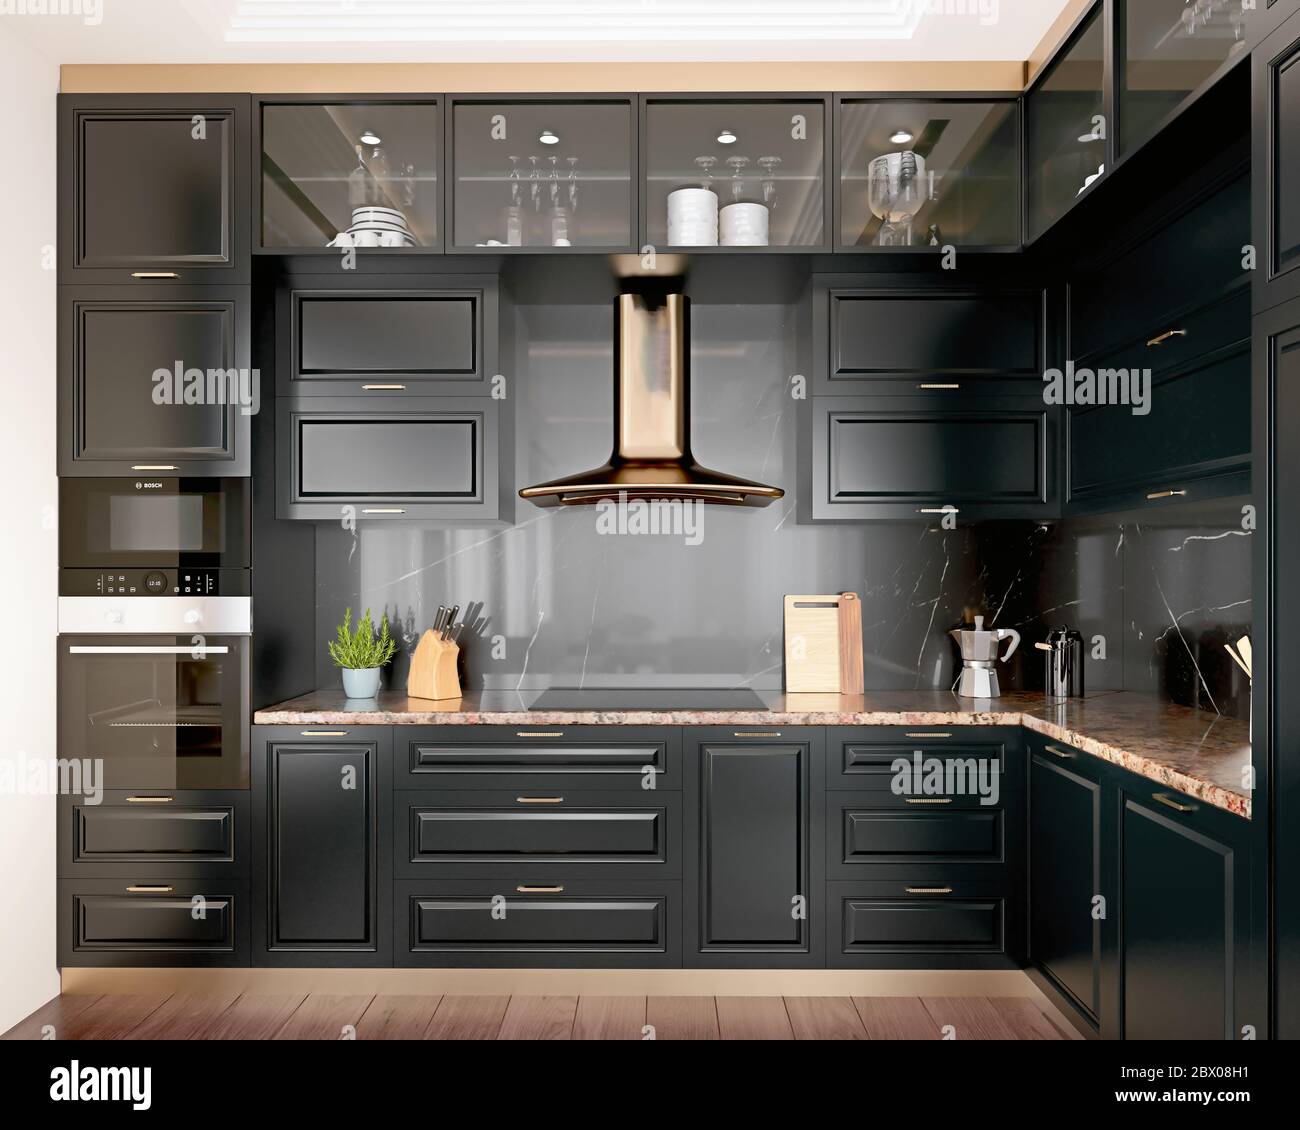 Modern Interior Design Kitchen With Black Marble Black Cabinets Dark Gold Trim And Granite Countertop 3d Render 3d Illustration Stock Photo Alamy,Furnishing A New Home Cost